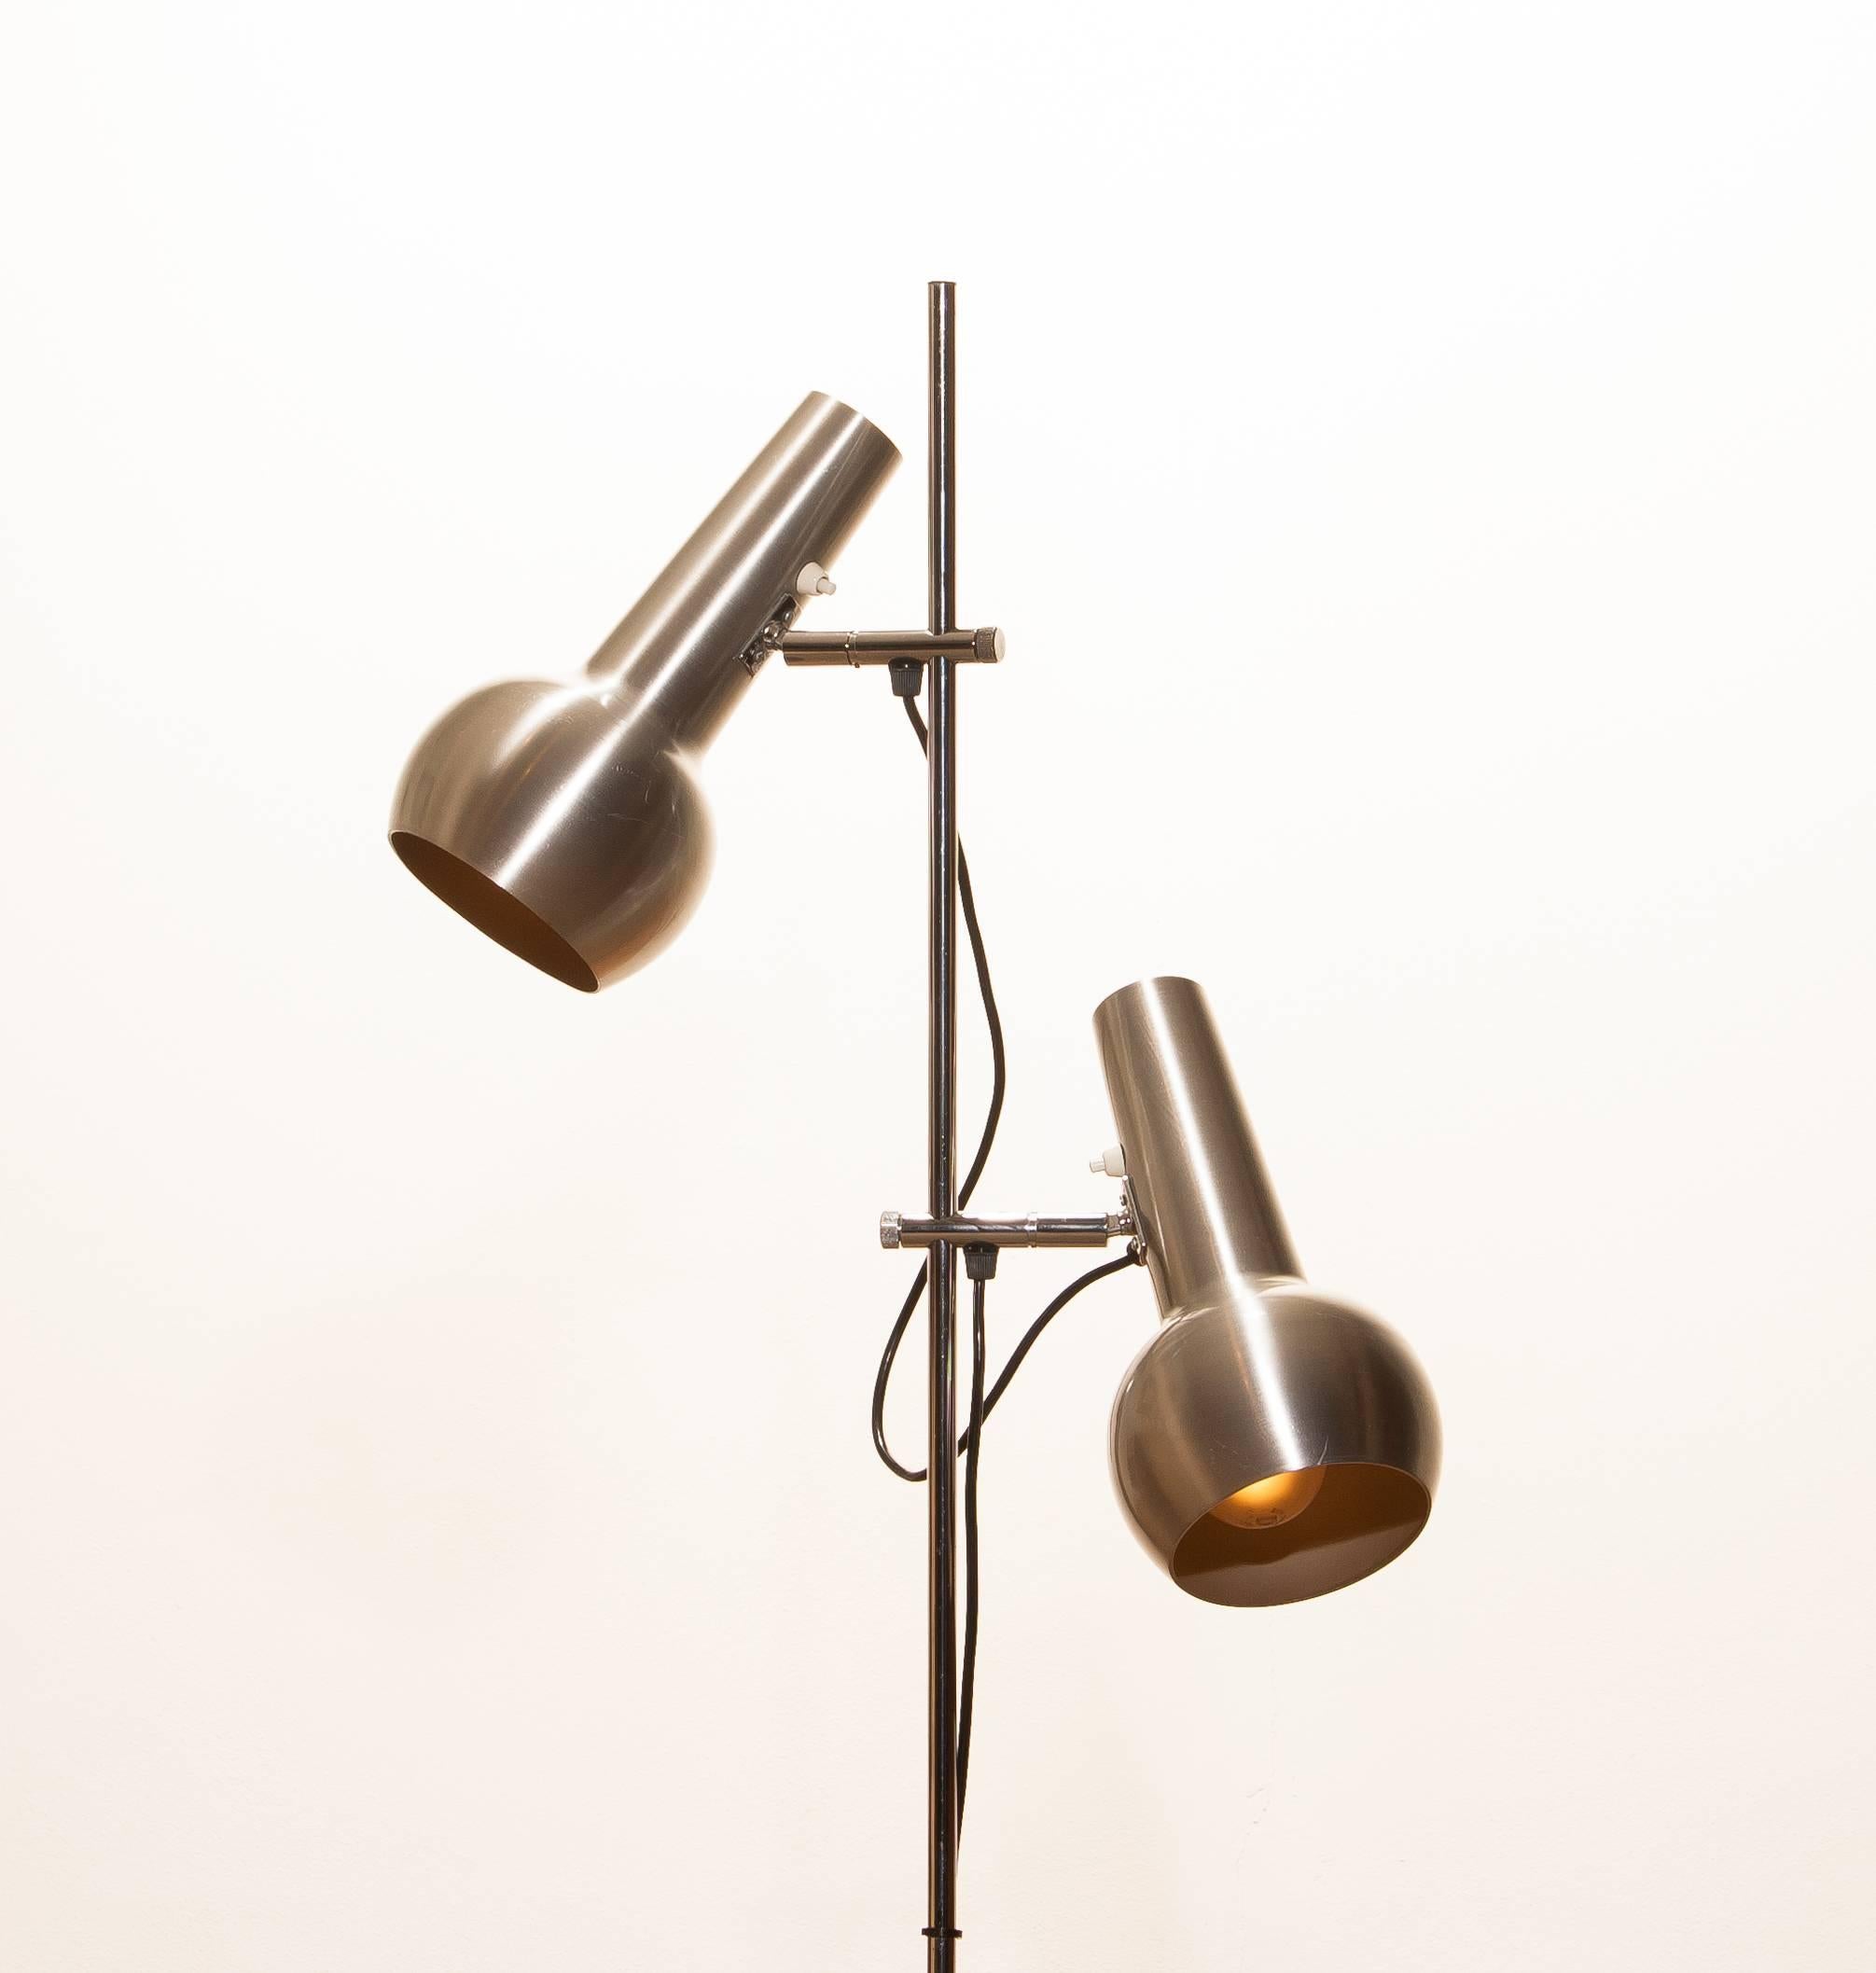 Mid-Century Modern Chrome and Aluminium Double Shade Floor Lamp by Koch & Lowy from the 1970s, US